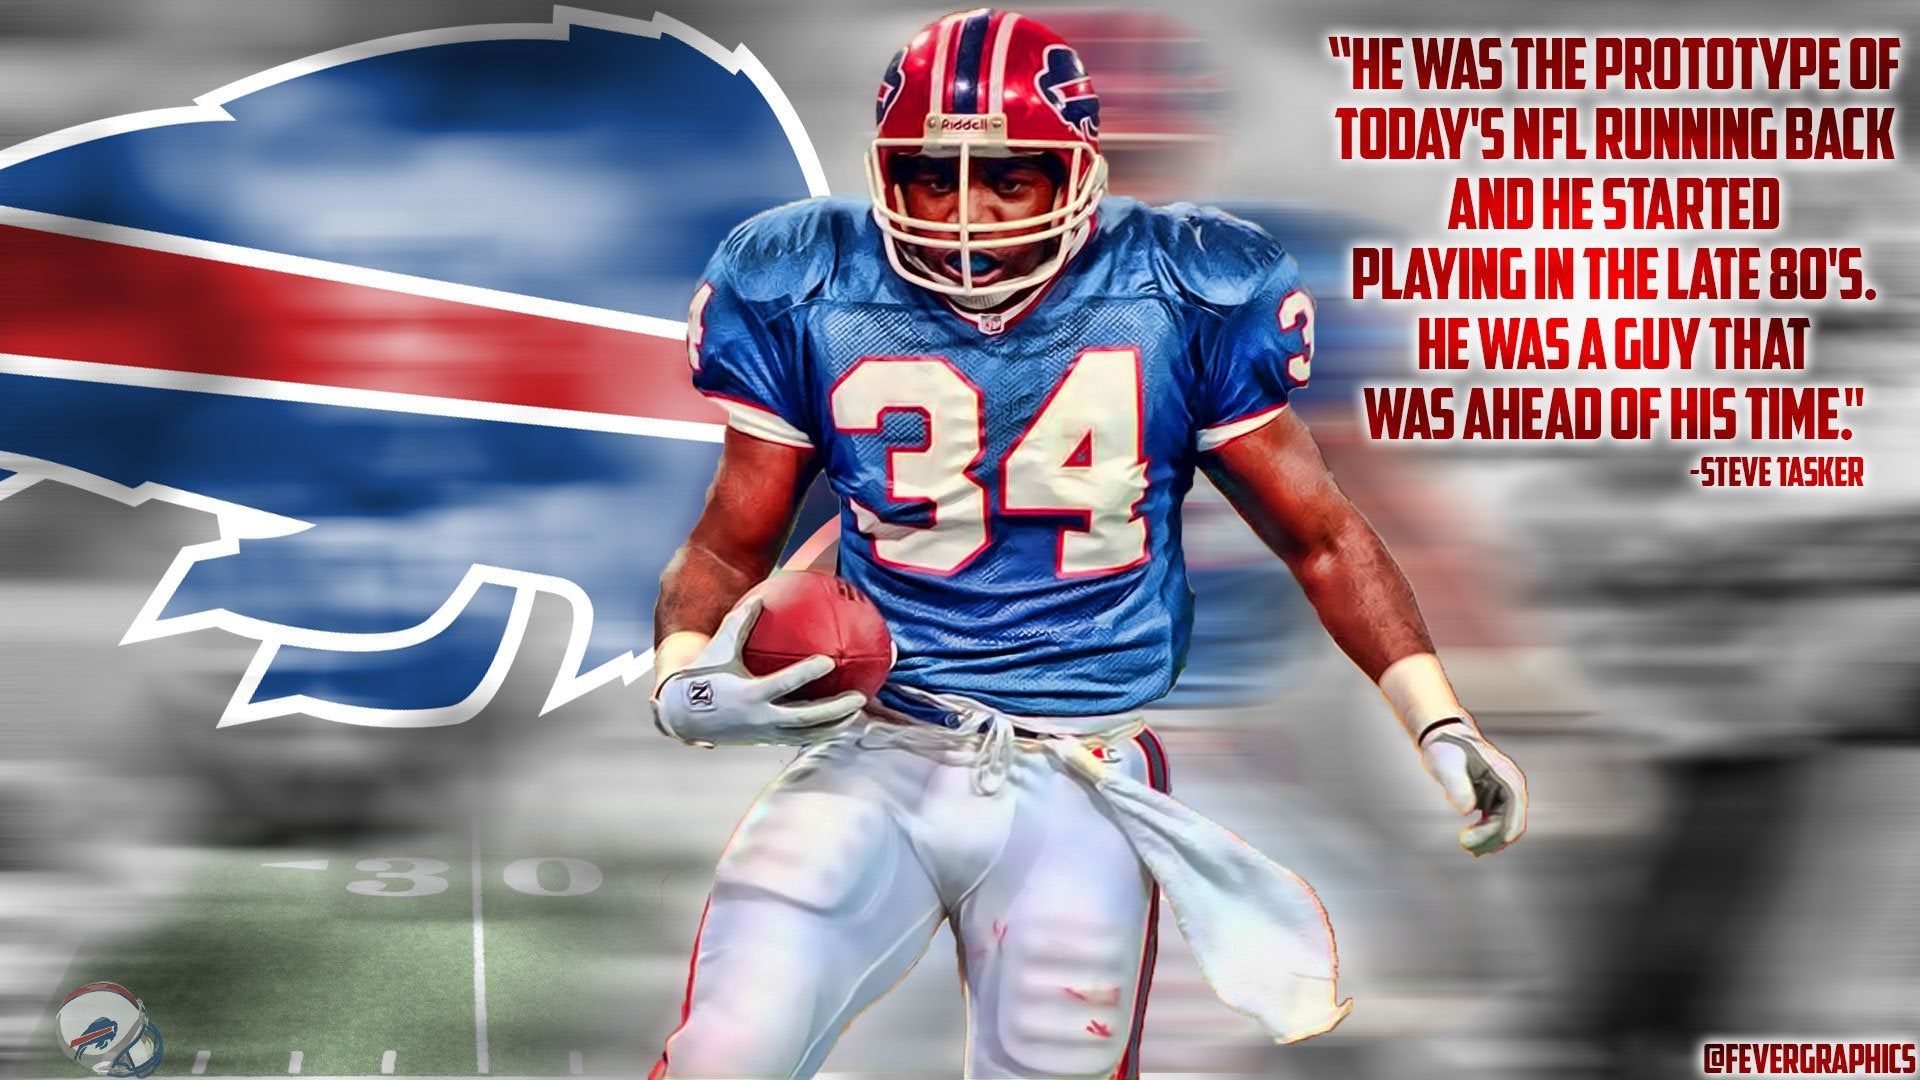 Bills sub! I made a Thurman Thomas wallpaper for you guys. (The helmet is for his pre game ritual ONLY. NOT to offend you guys, I have nothing but respect for Thomas)